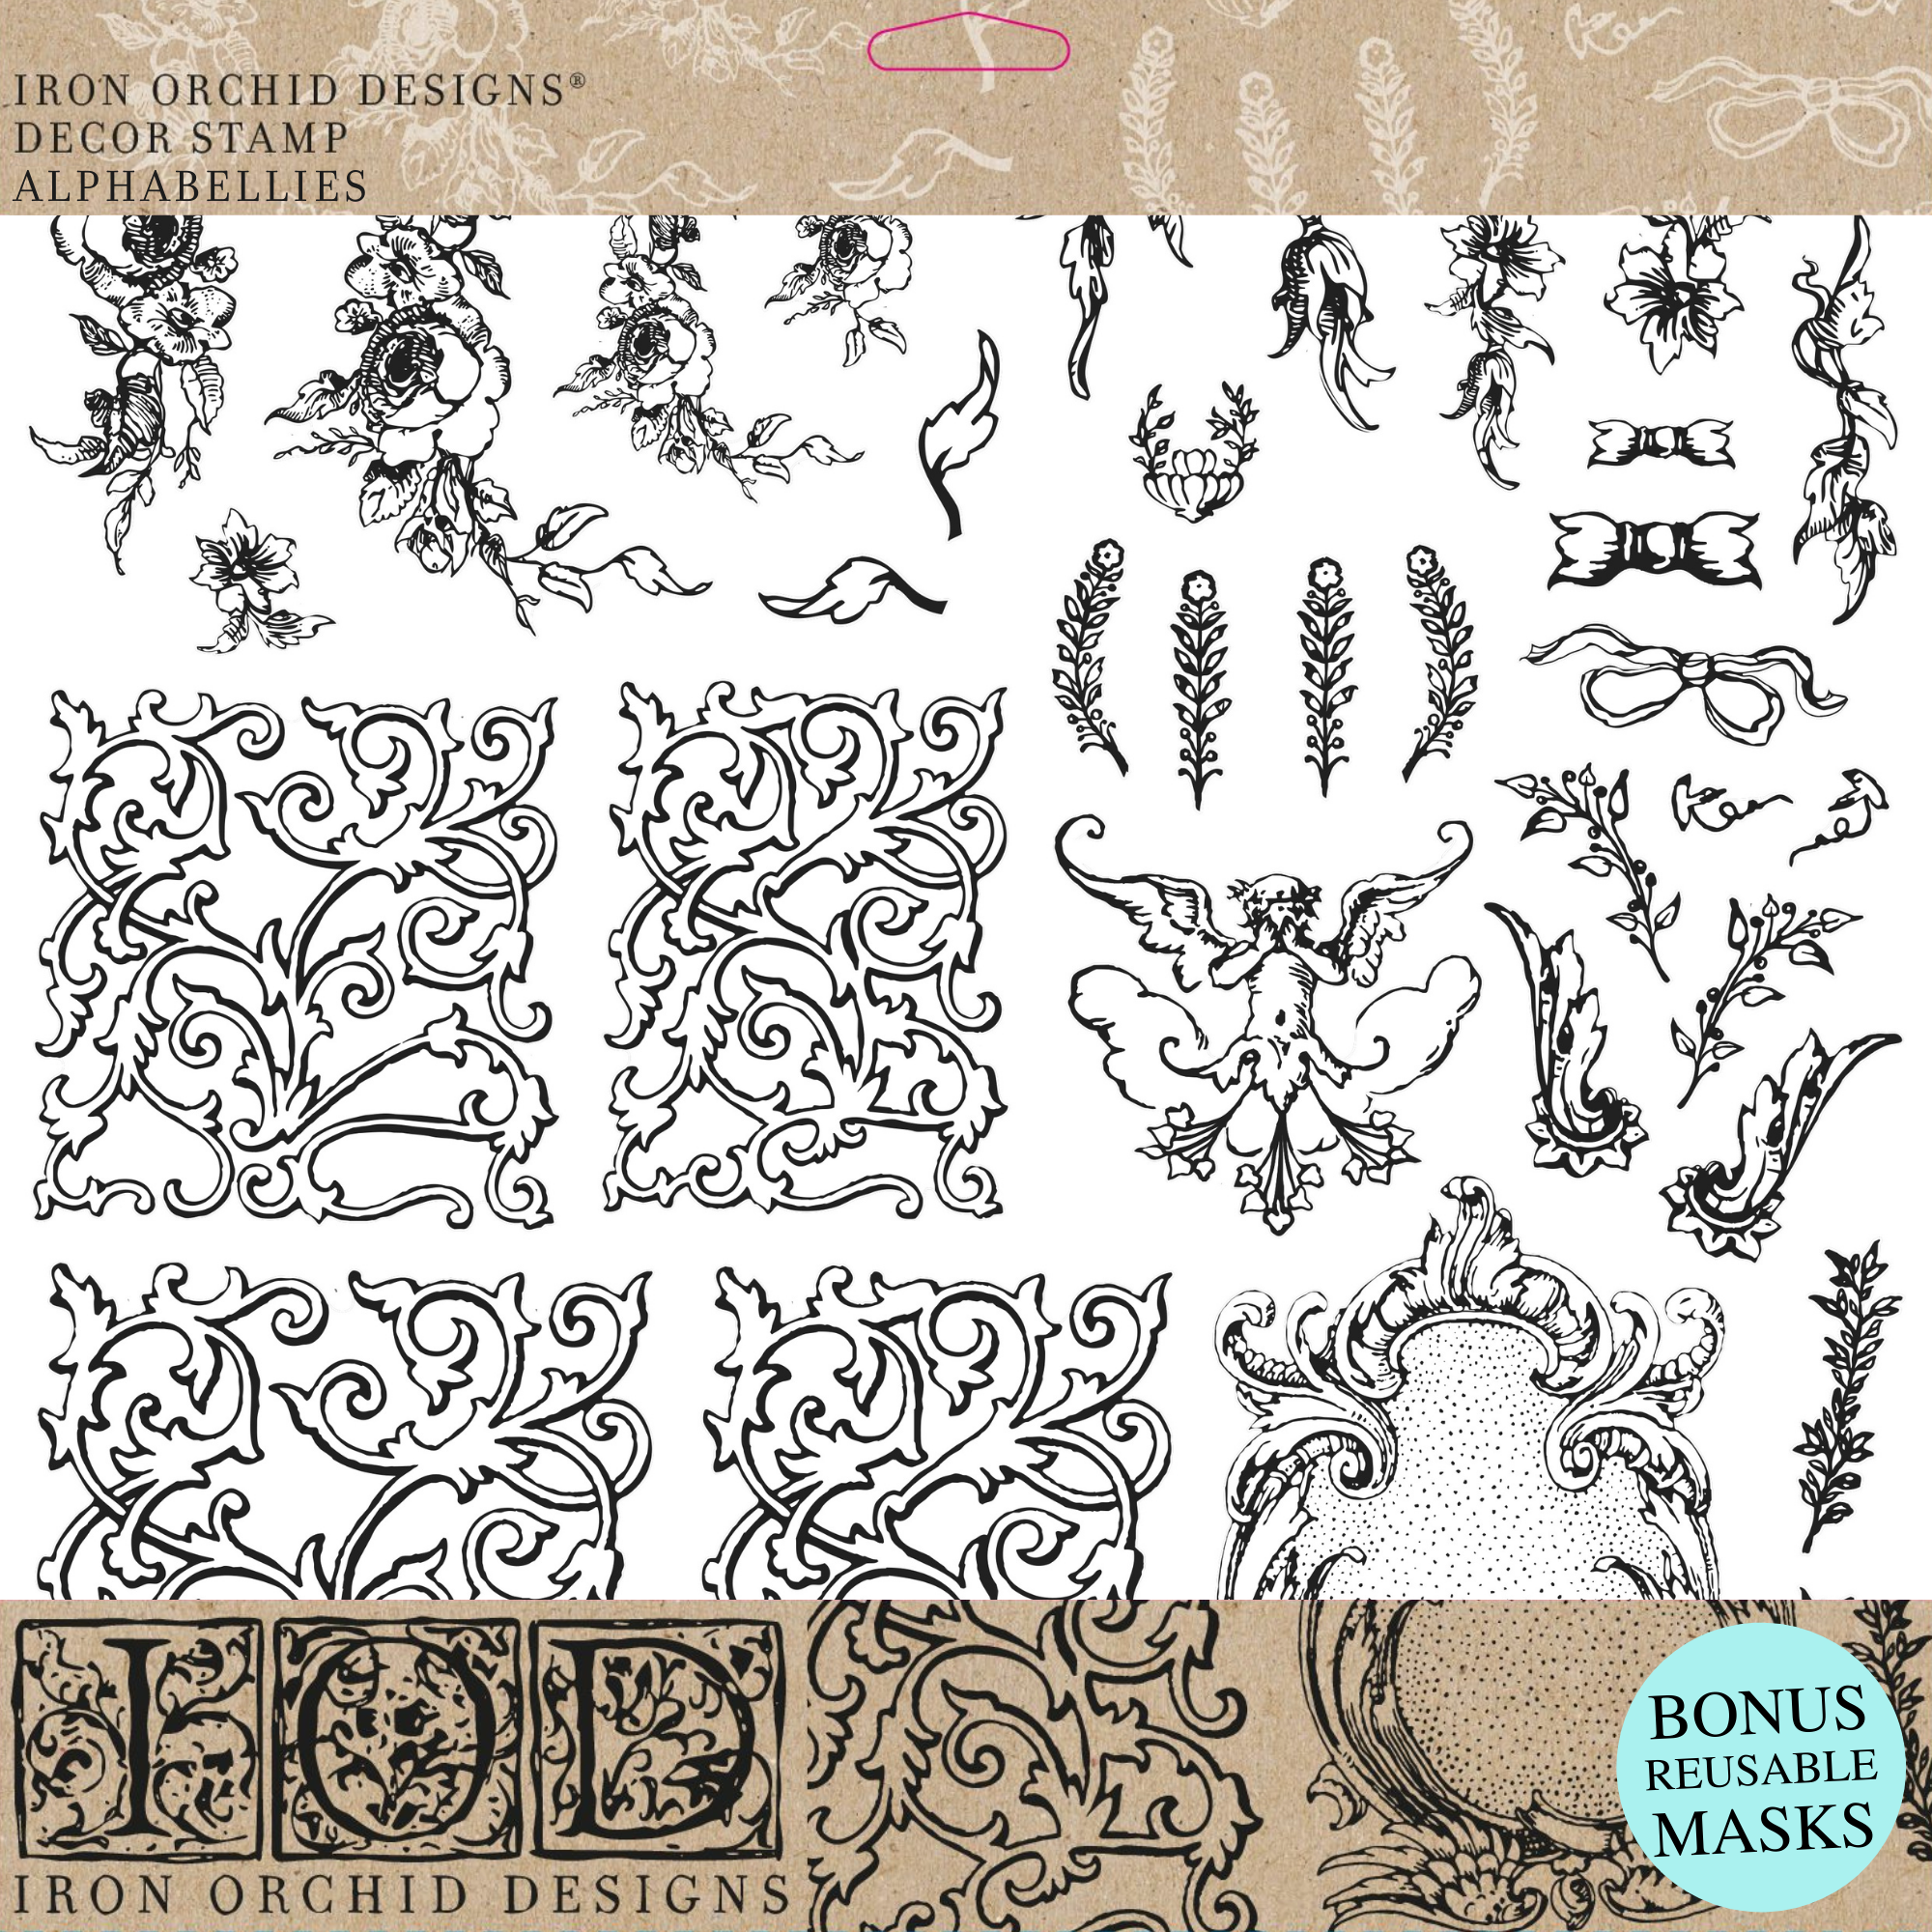 Alphabellies Decor Stamp by IOD - Iron Orchid Designs @ Painted Heirloom